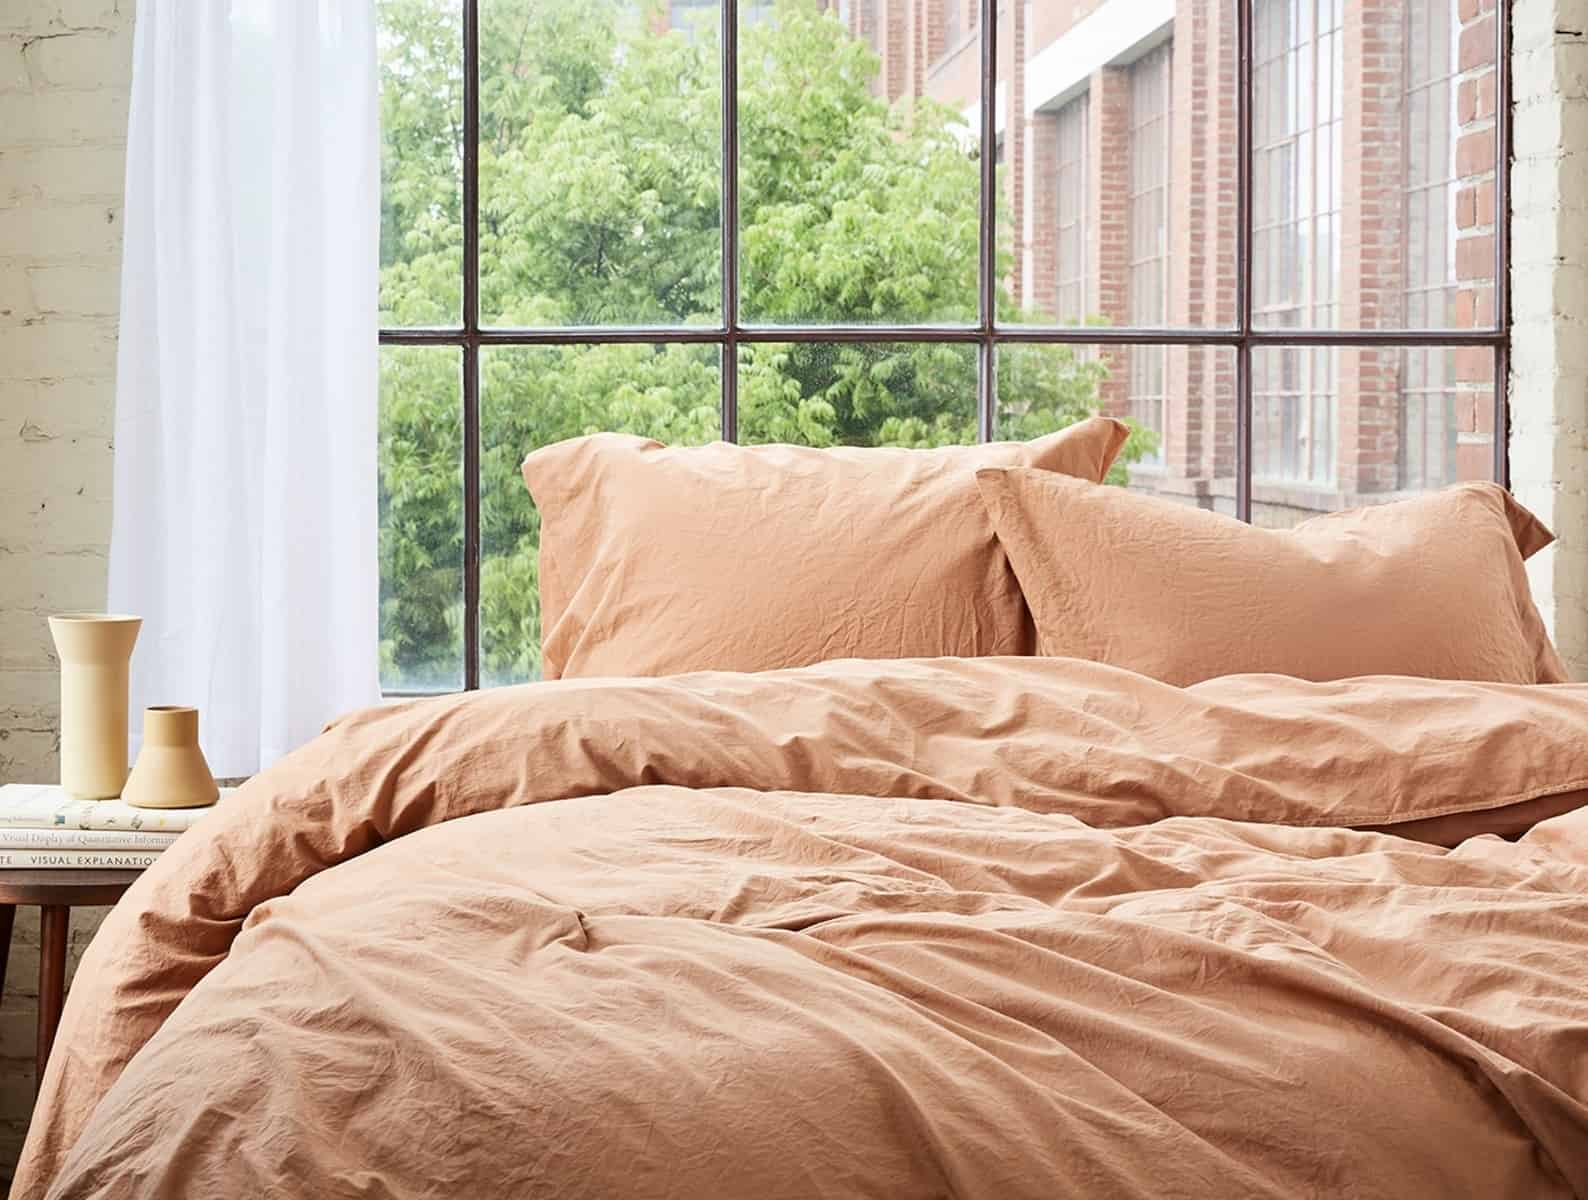 Ginger Sheets Will Add Warmth To Your Bedroom